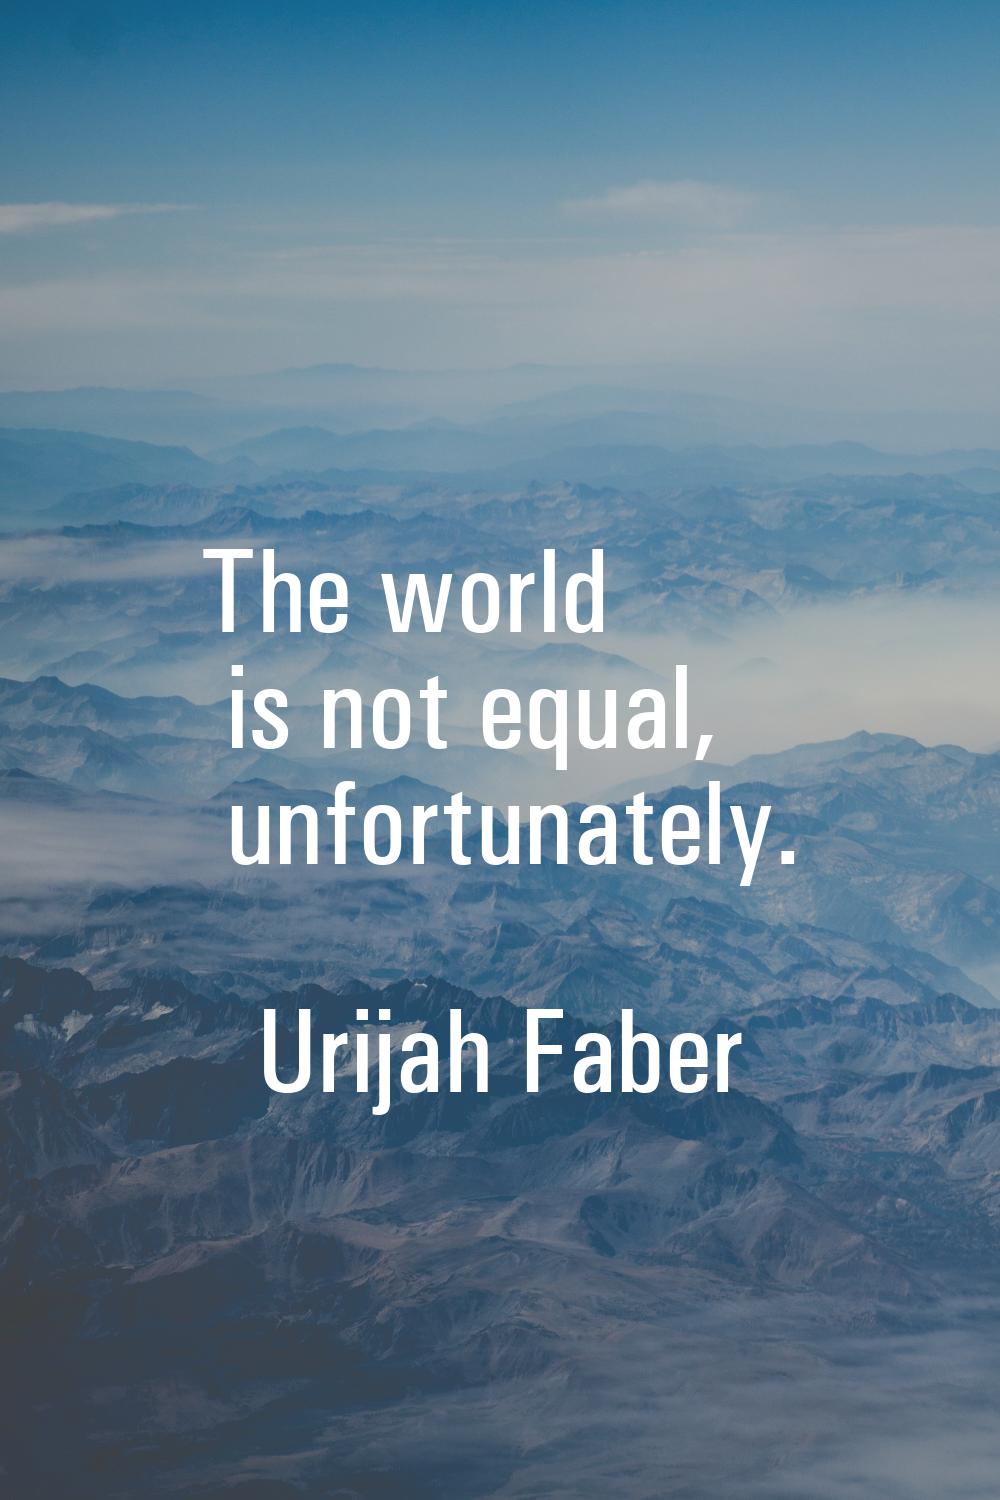 The world is not equal, unfortunately.